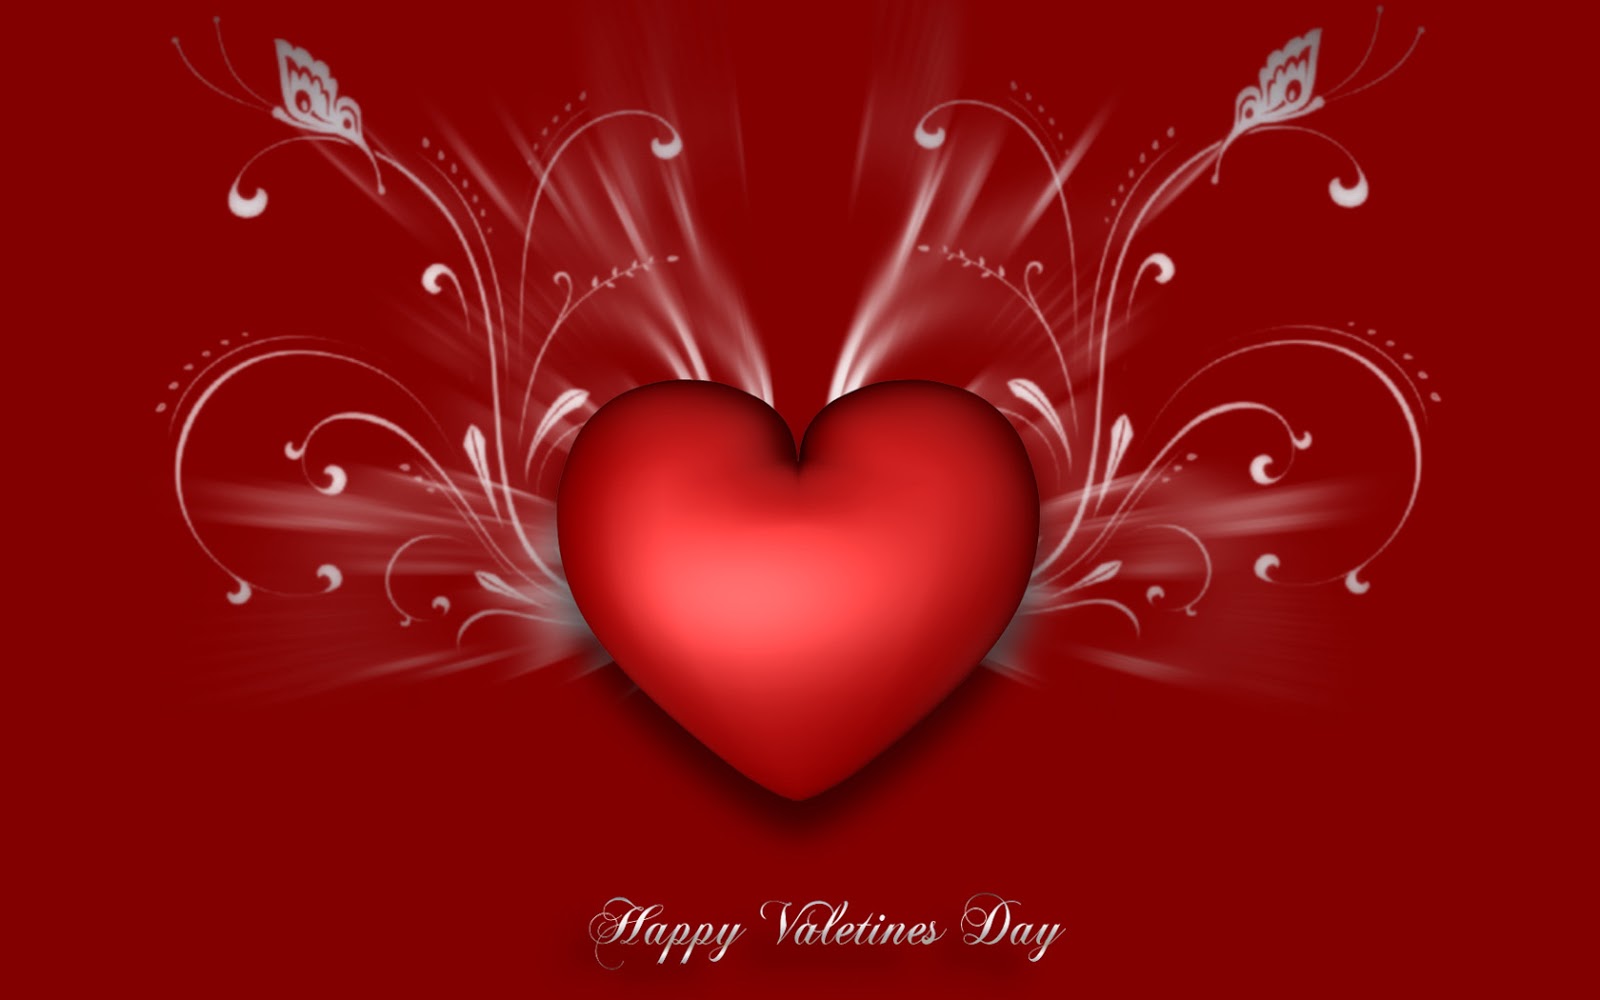 Valentines day images , Valentines day wallpaper 2016